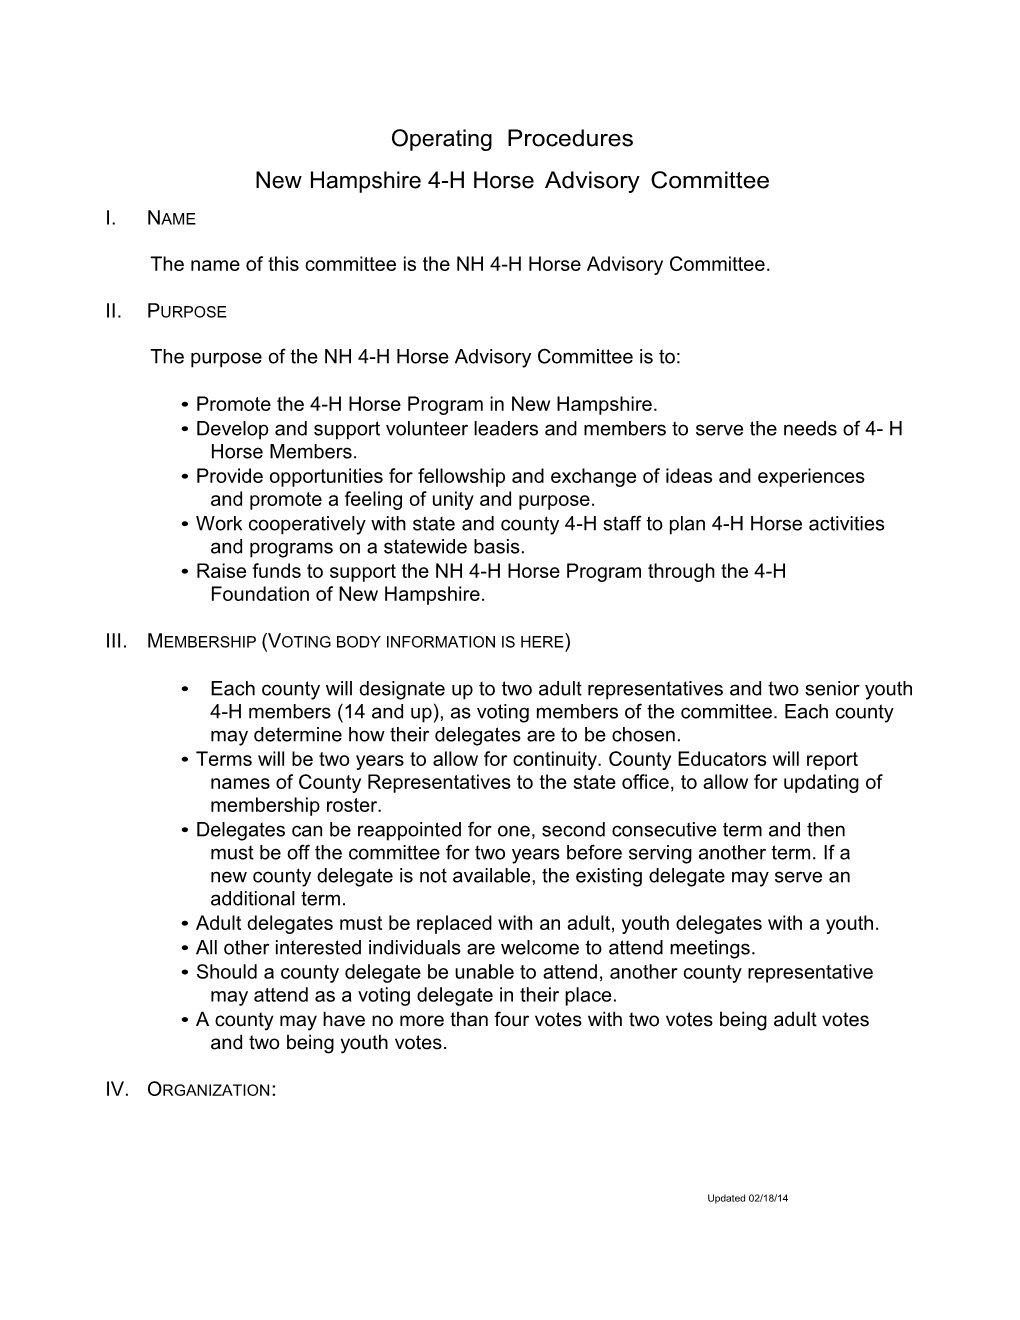 Operating Procedures - NH 4-H Horse Advisory Committee